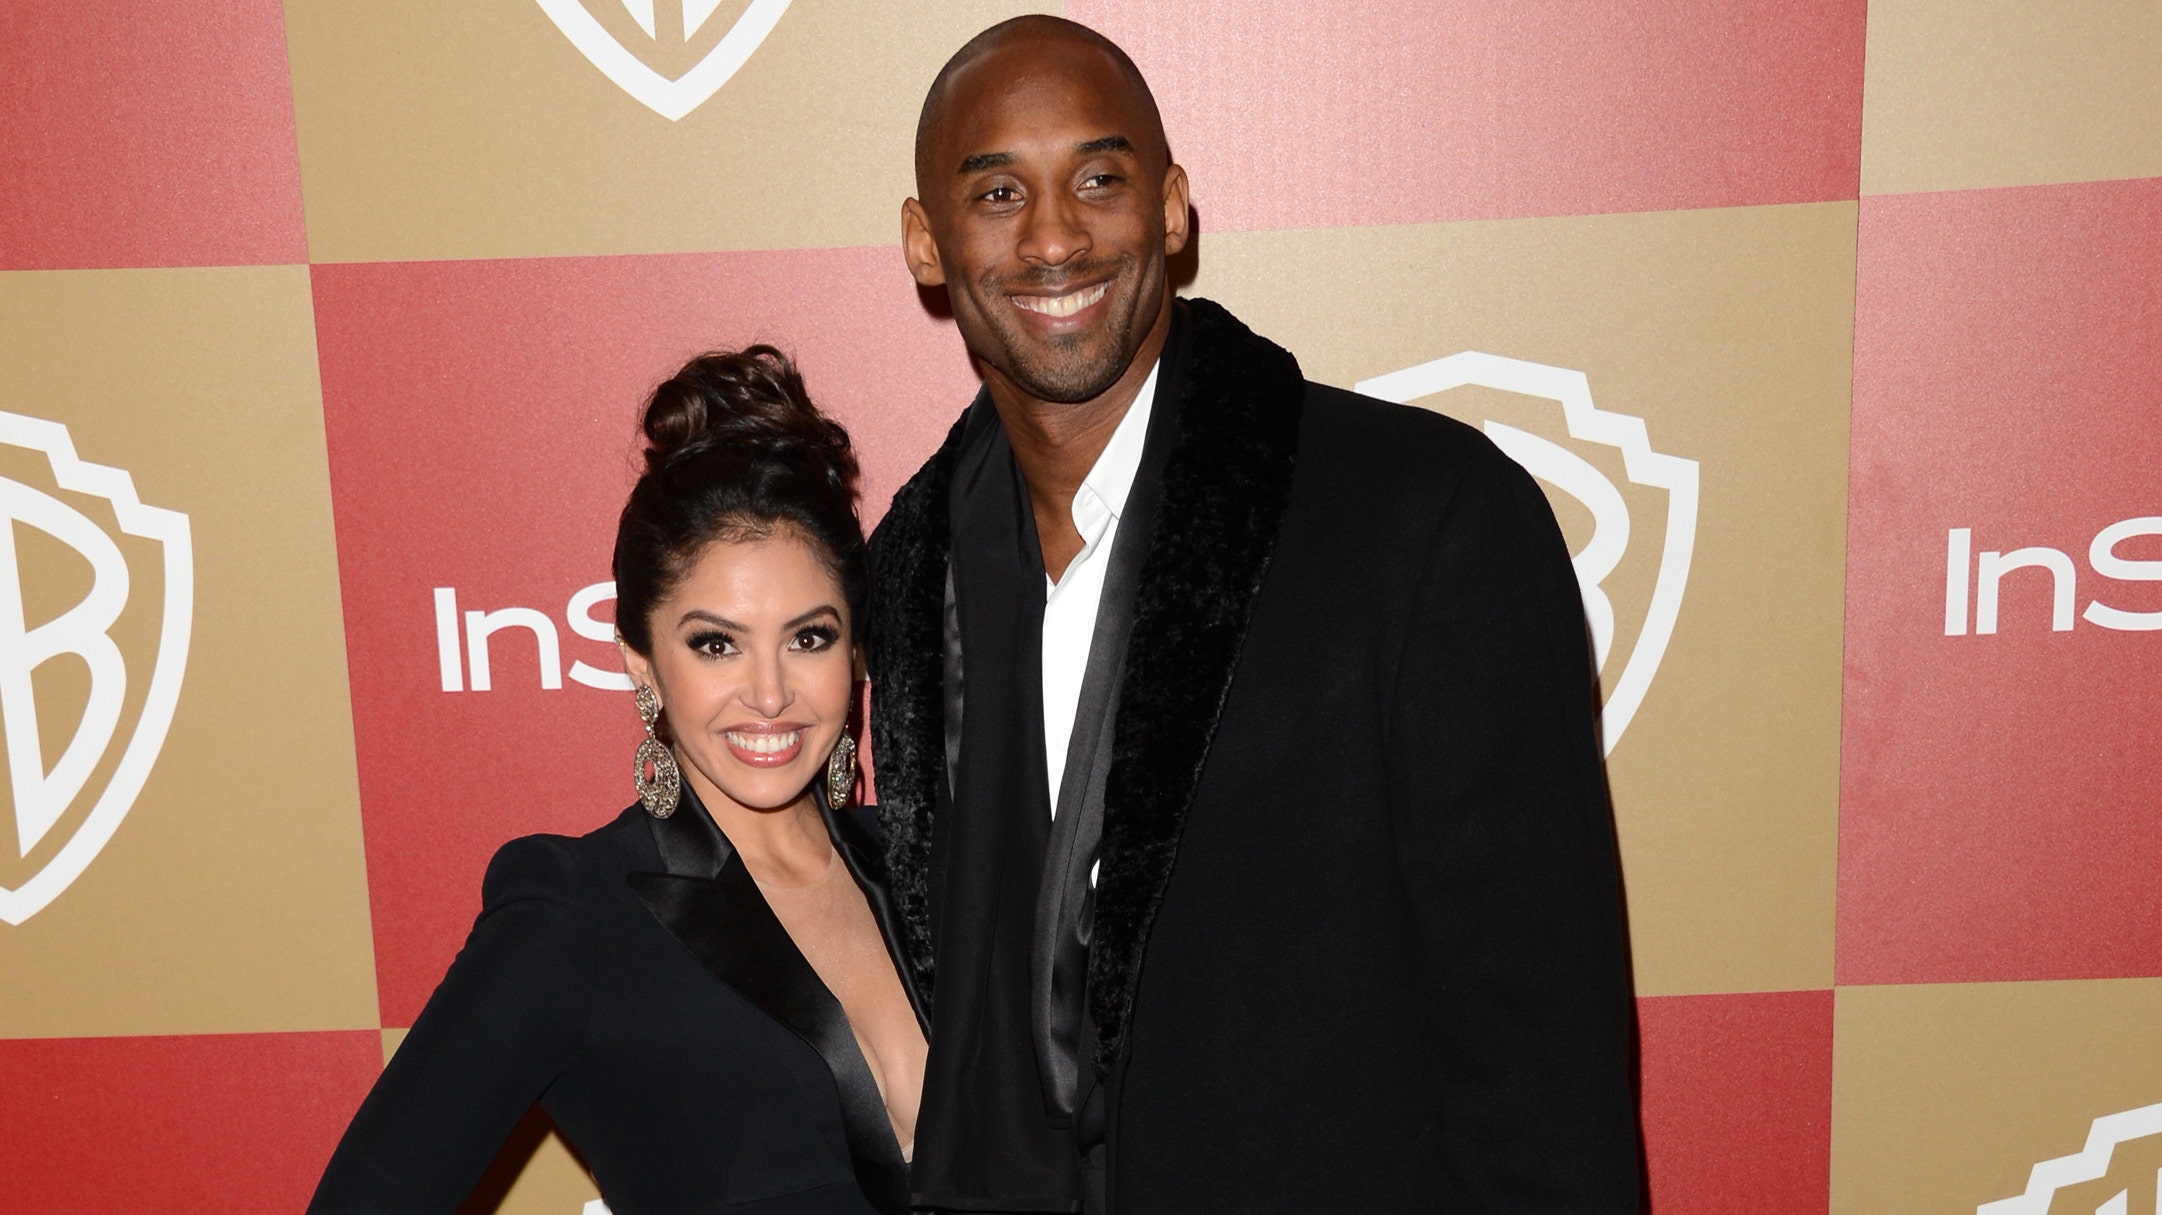 Fire captain Kobe Bryant denies sharing photos from crash site: “It was horrible”